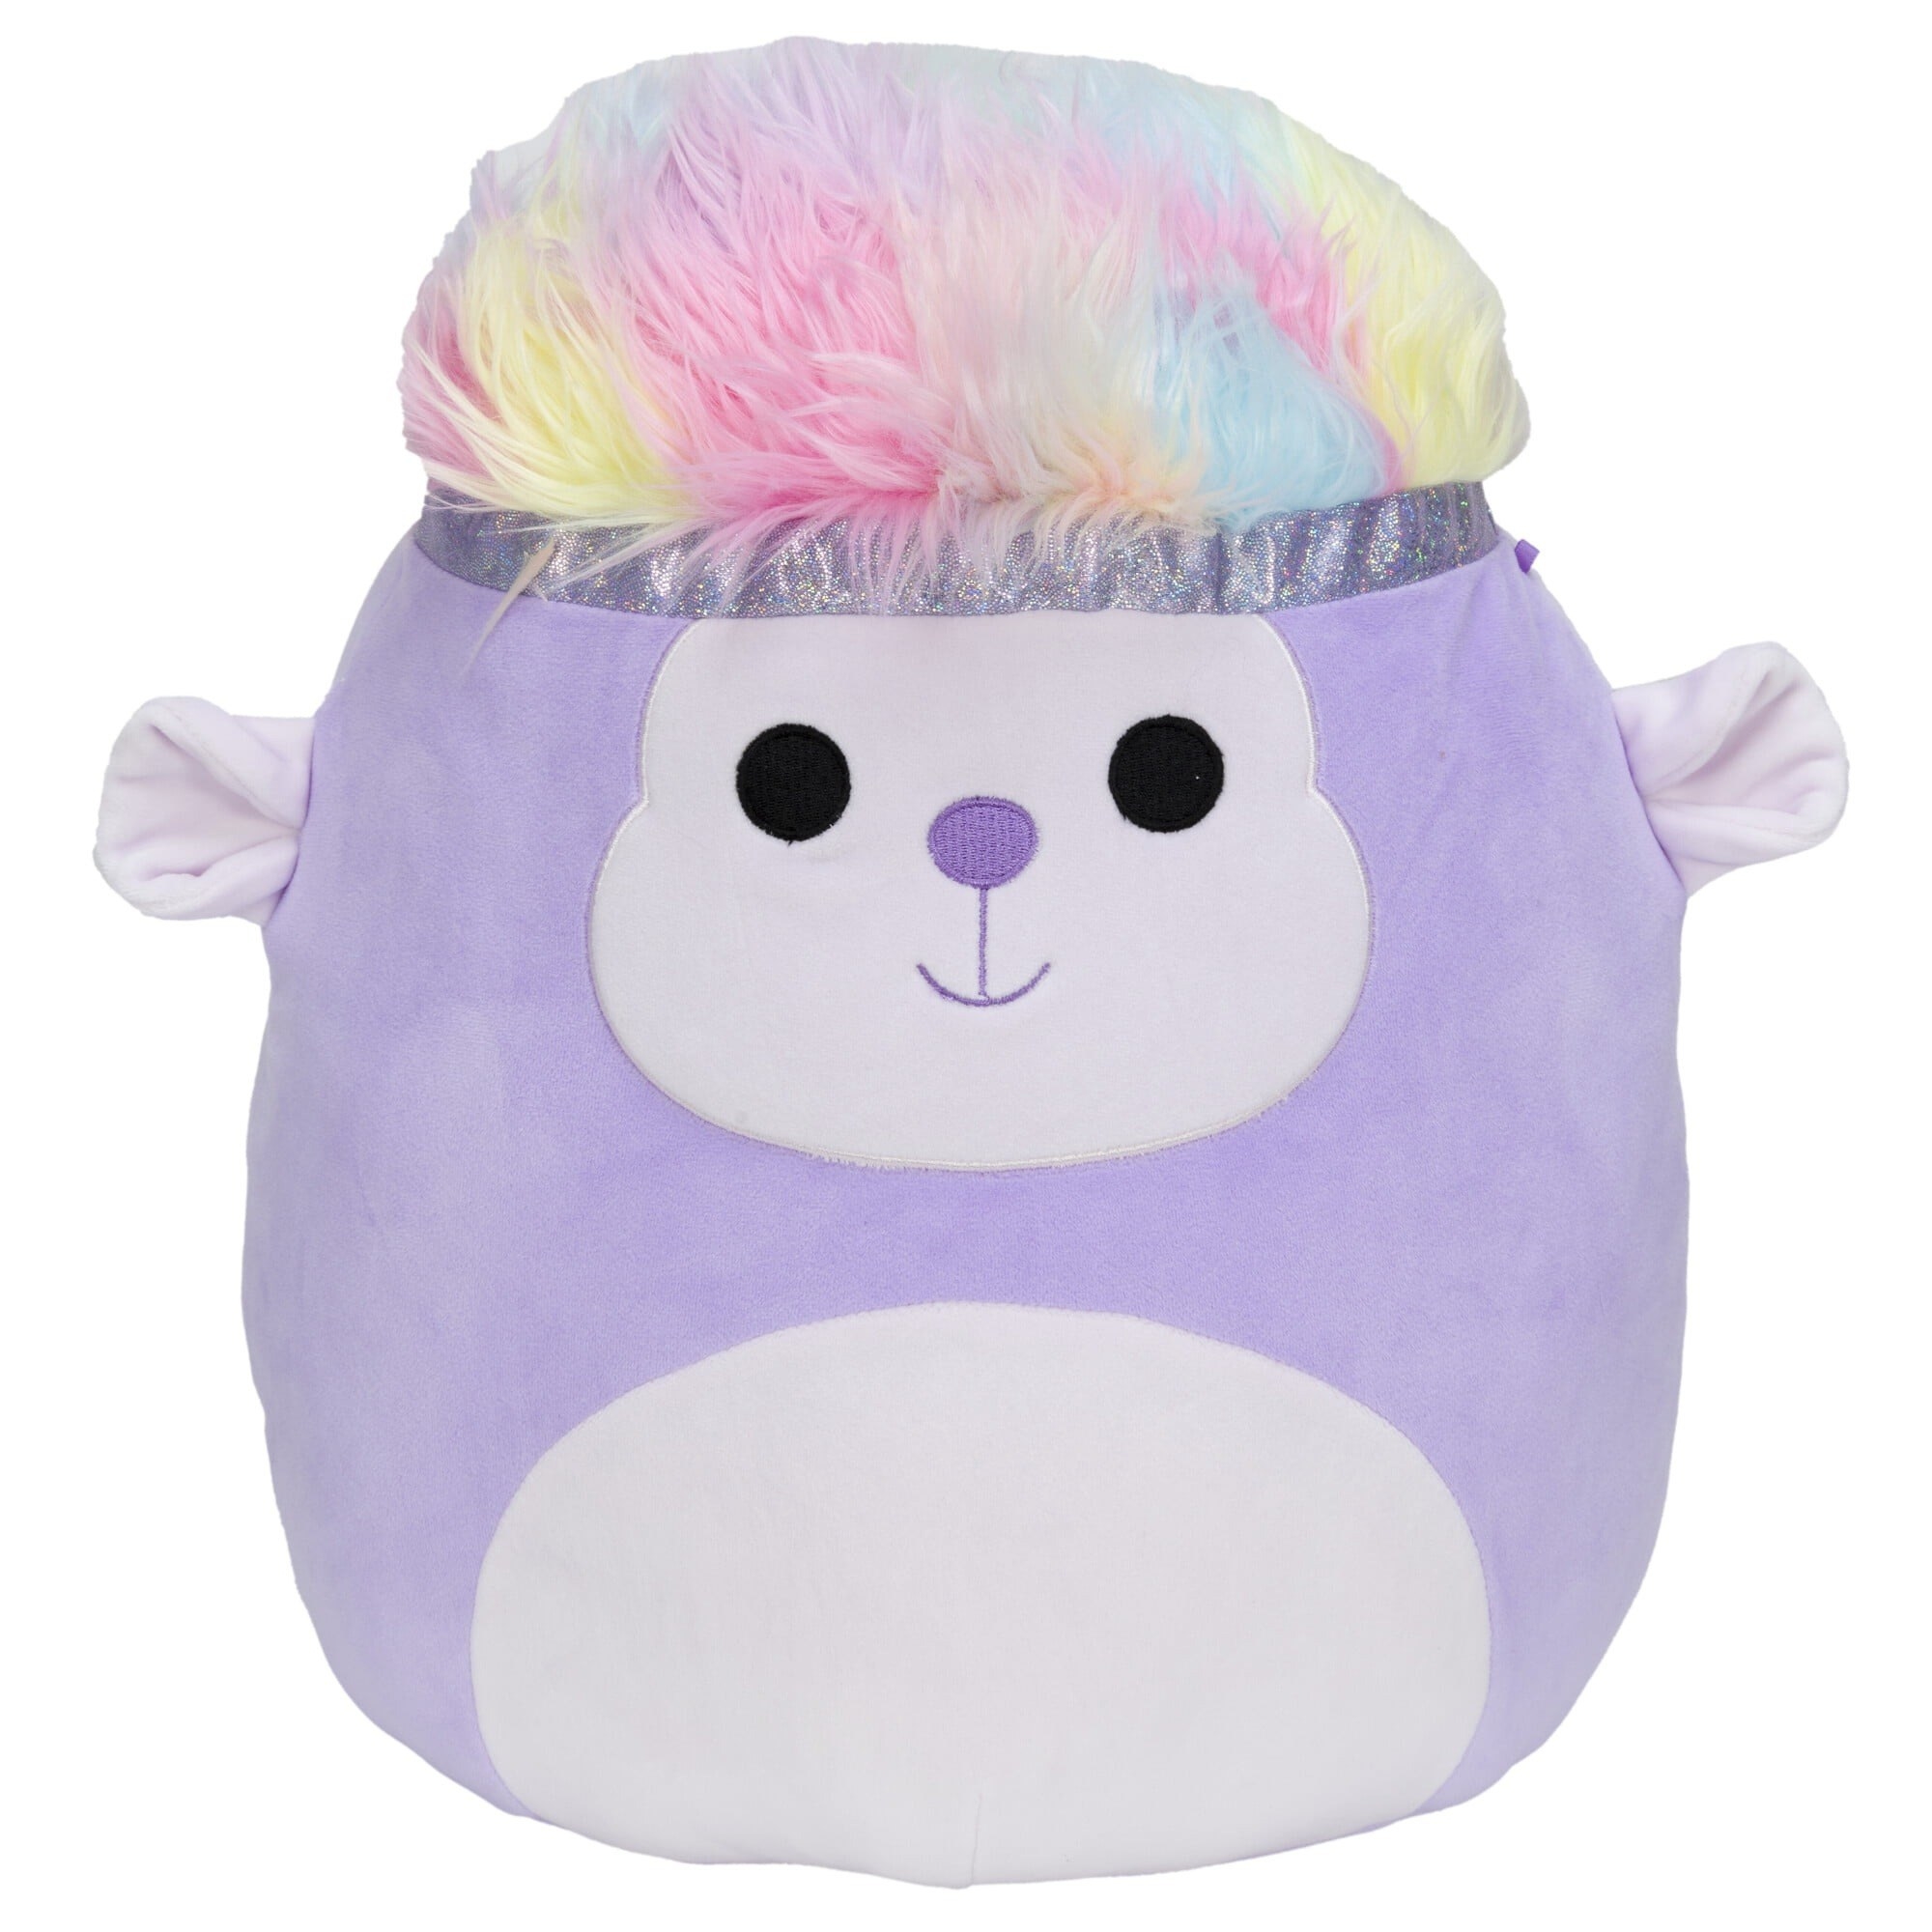 A purple monkey Squishmallow with multi-colored fluffy hair.